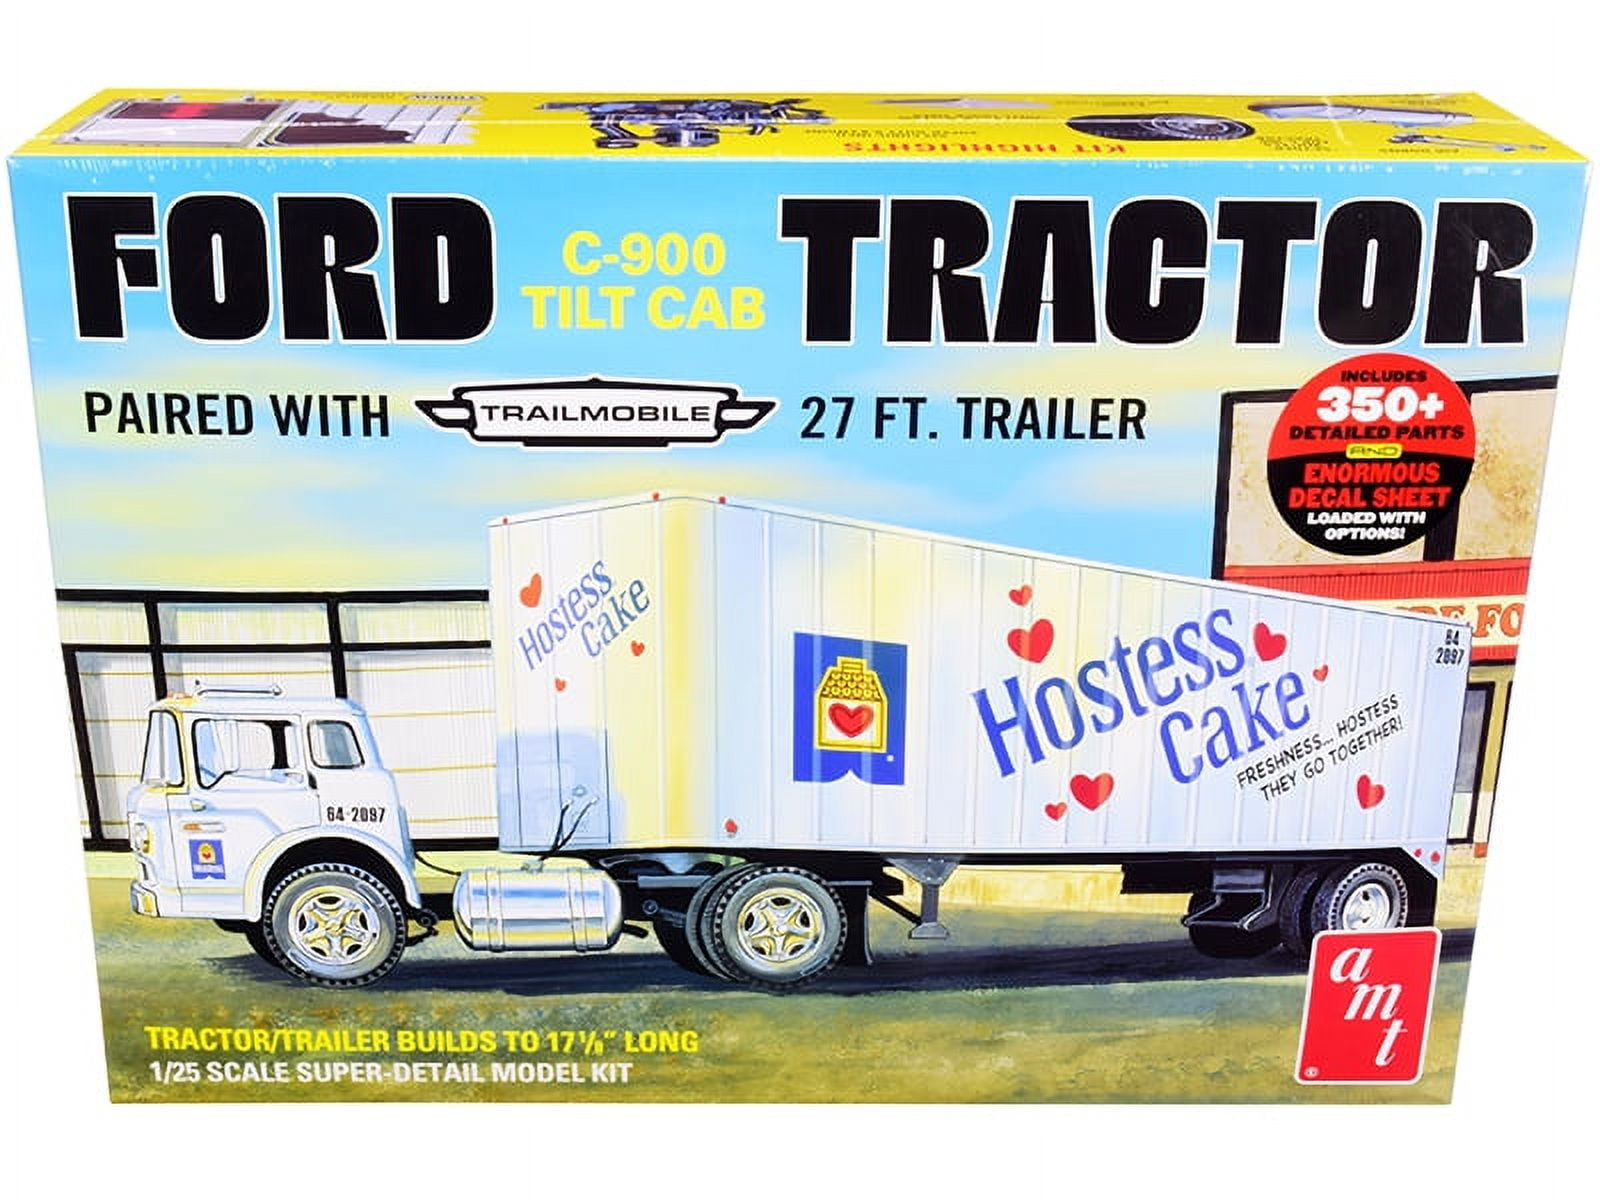 Picture of AMT AMT1221 1-25 Scale Model for Skill 3 Model Kit Ford C-900 Truck with Trailmobile Trailer Hostess